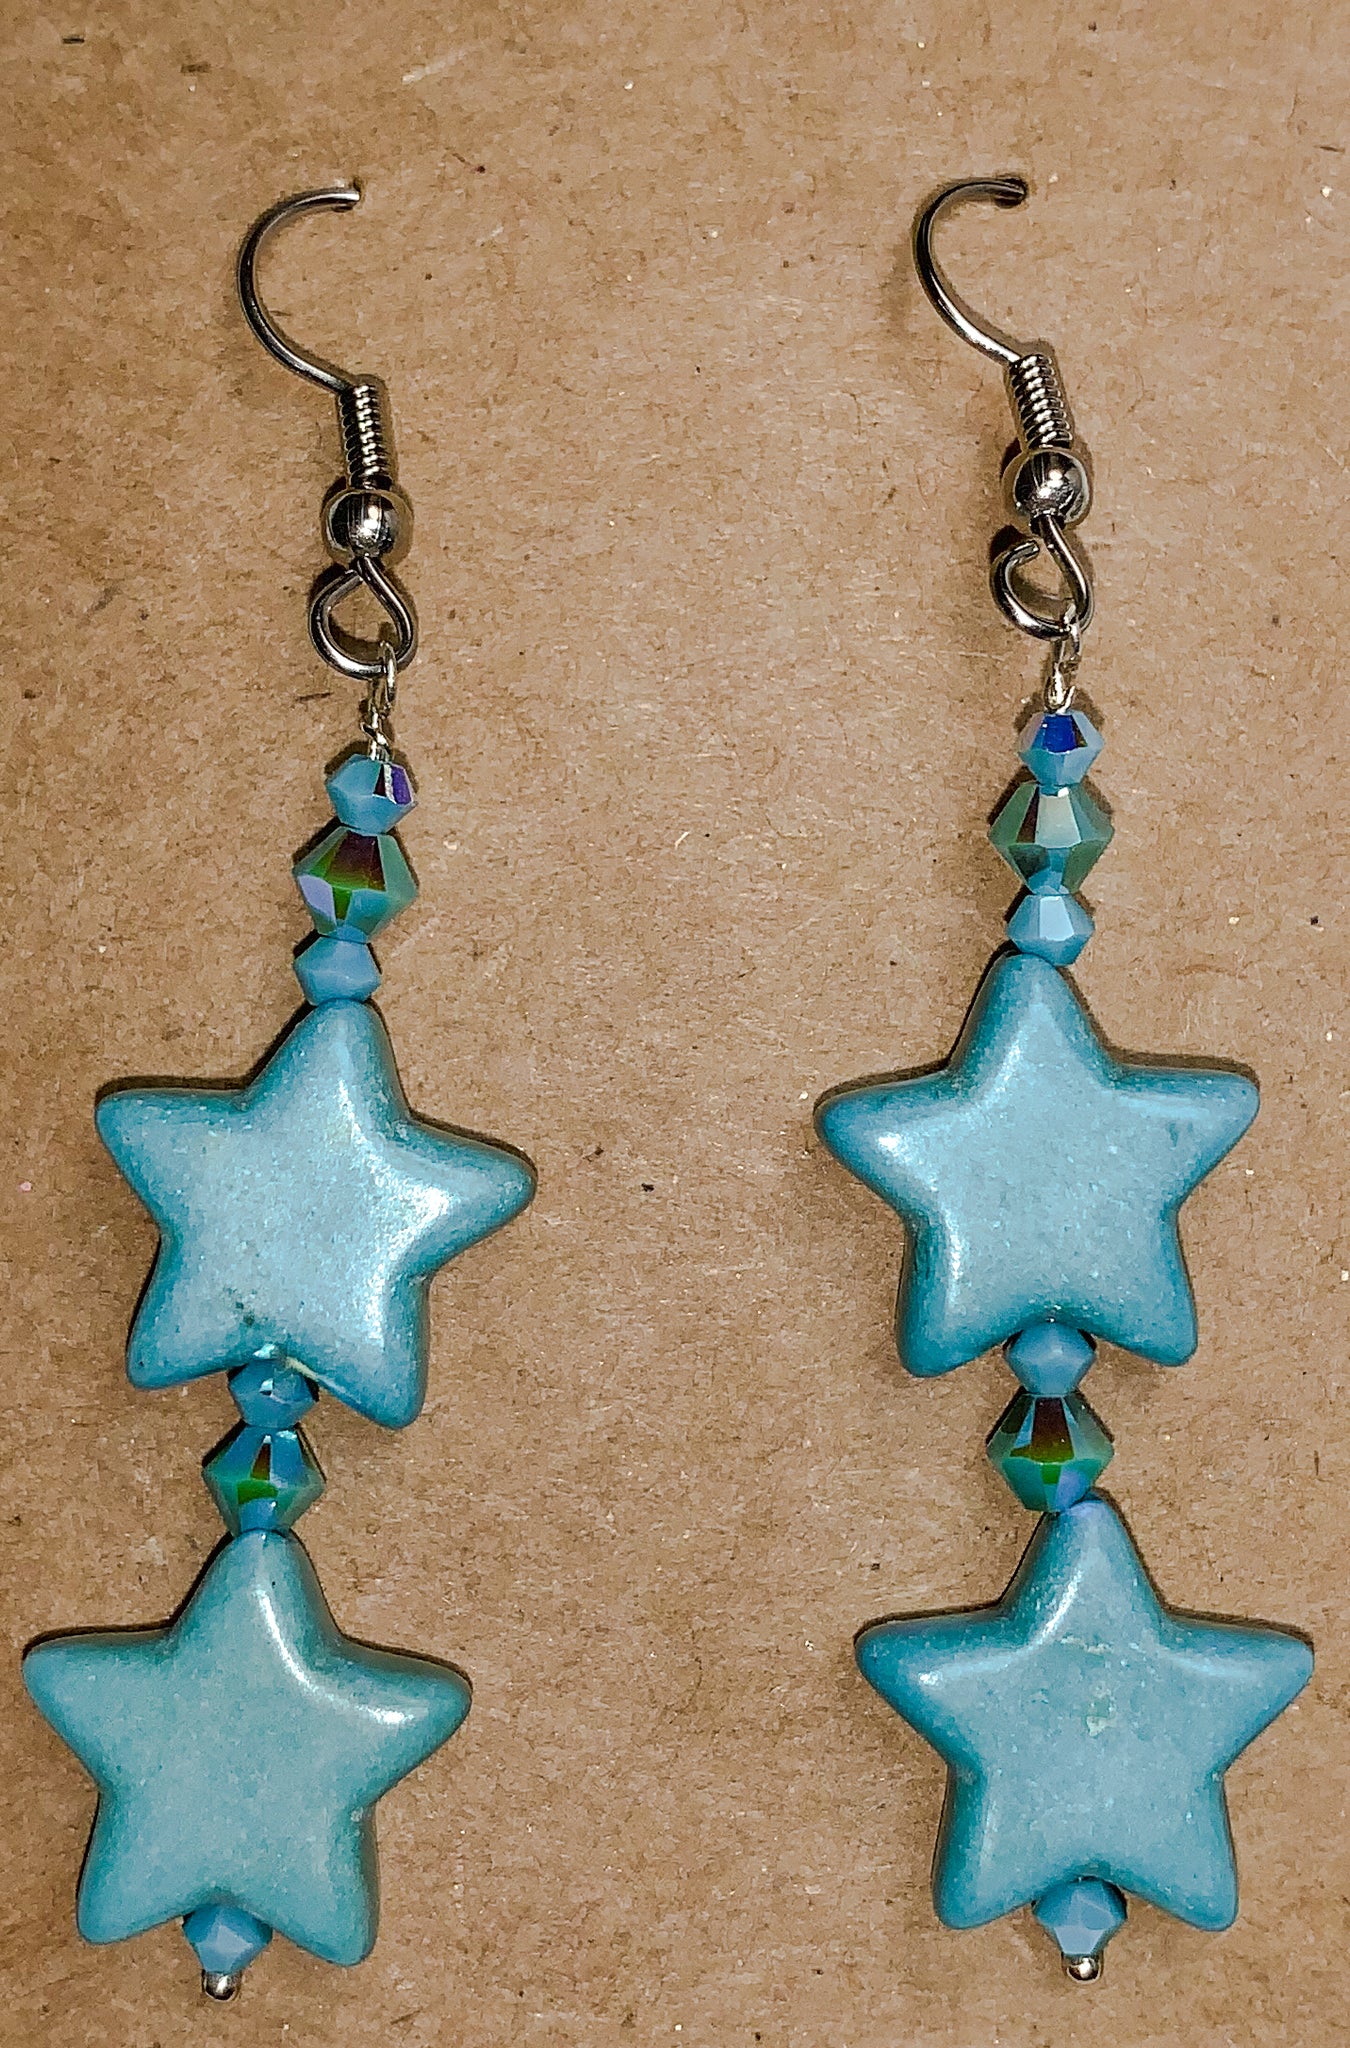 Turquoise colored star charms and crystal earrings